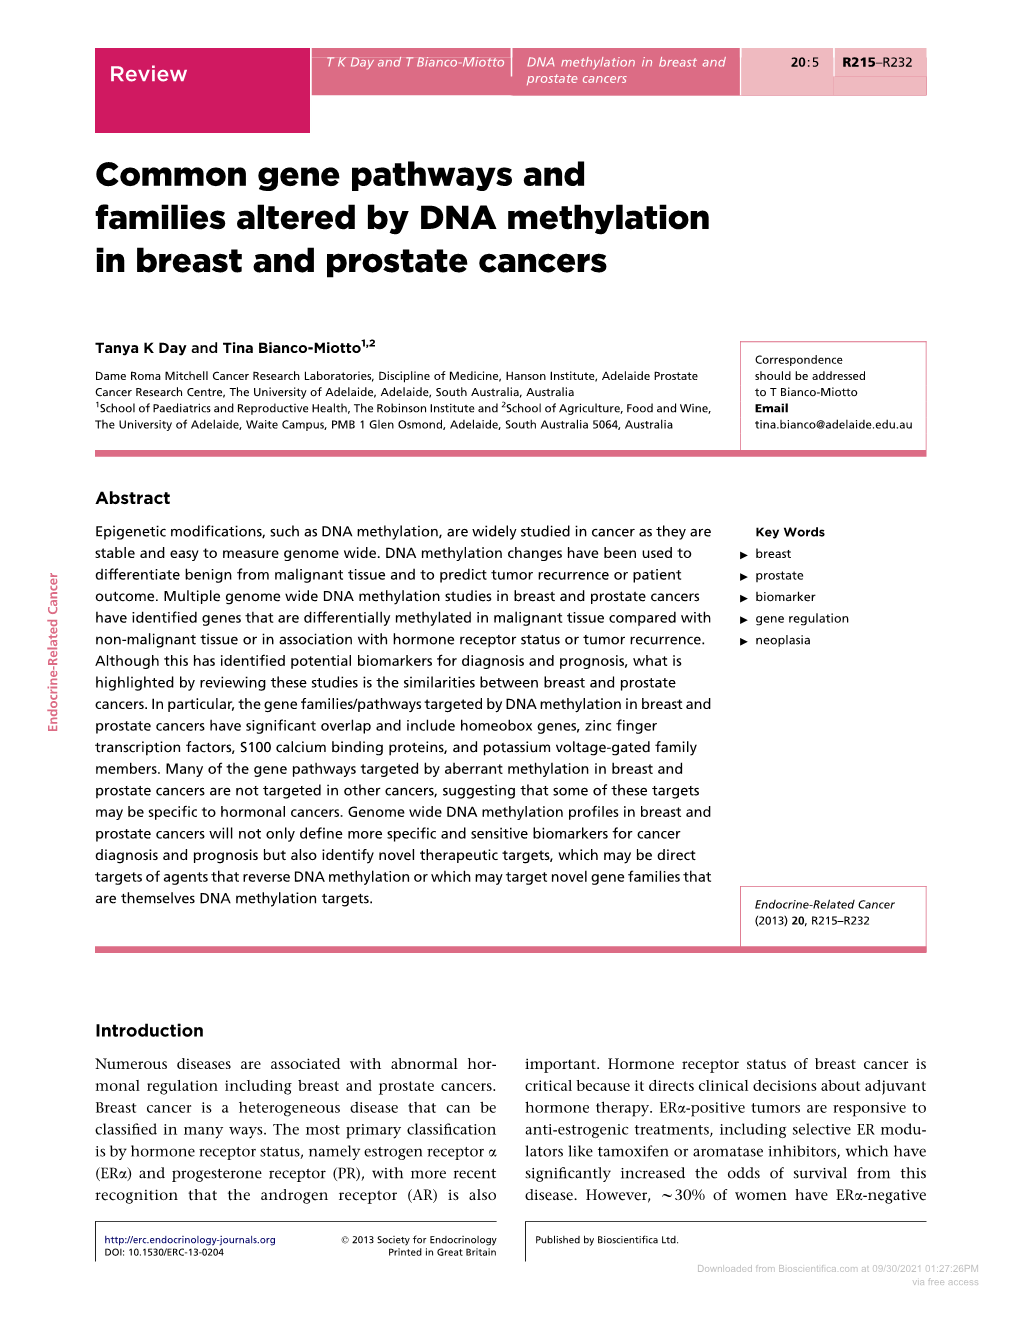 Common Gene Pathways and Families Altered by DNA Methylation in Breast and Prostate Cancers